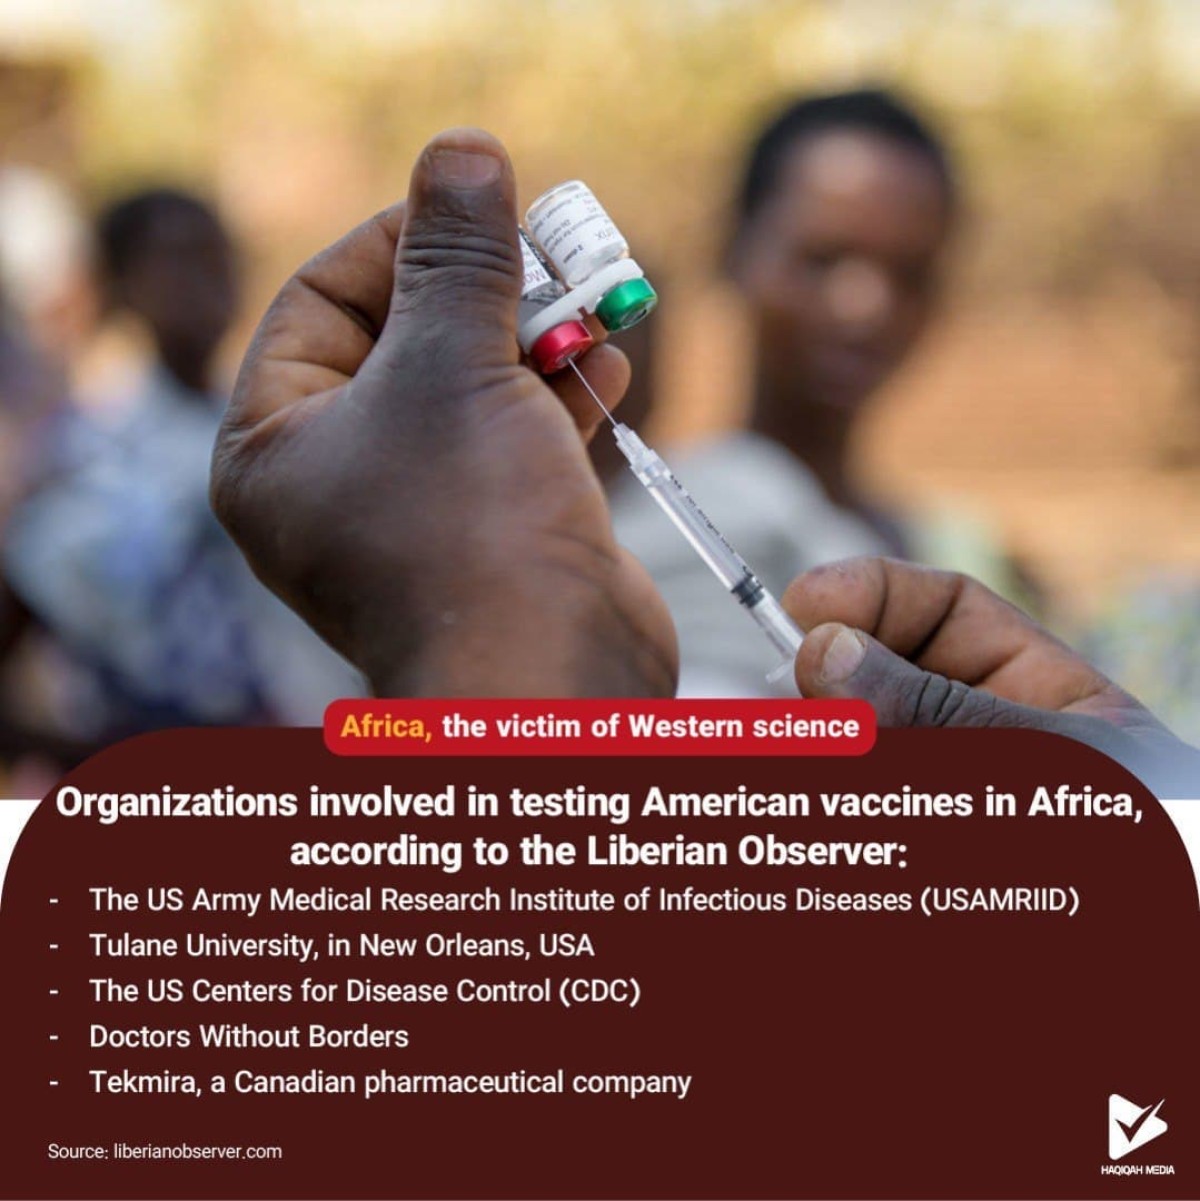 Organizations involved in testing American vaccines in Africa